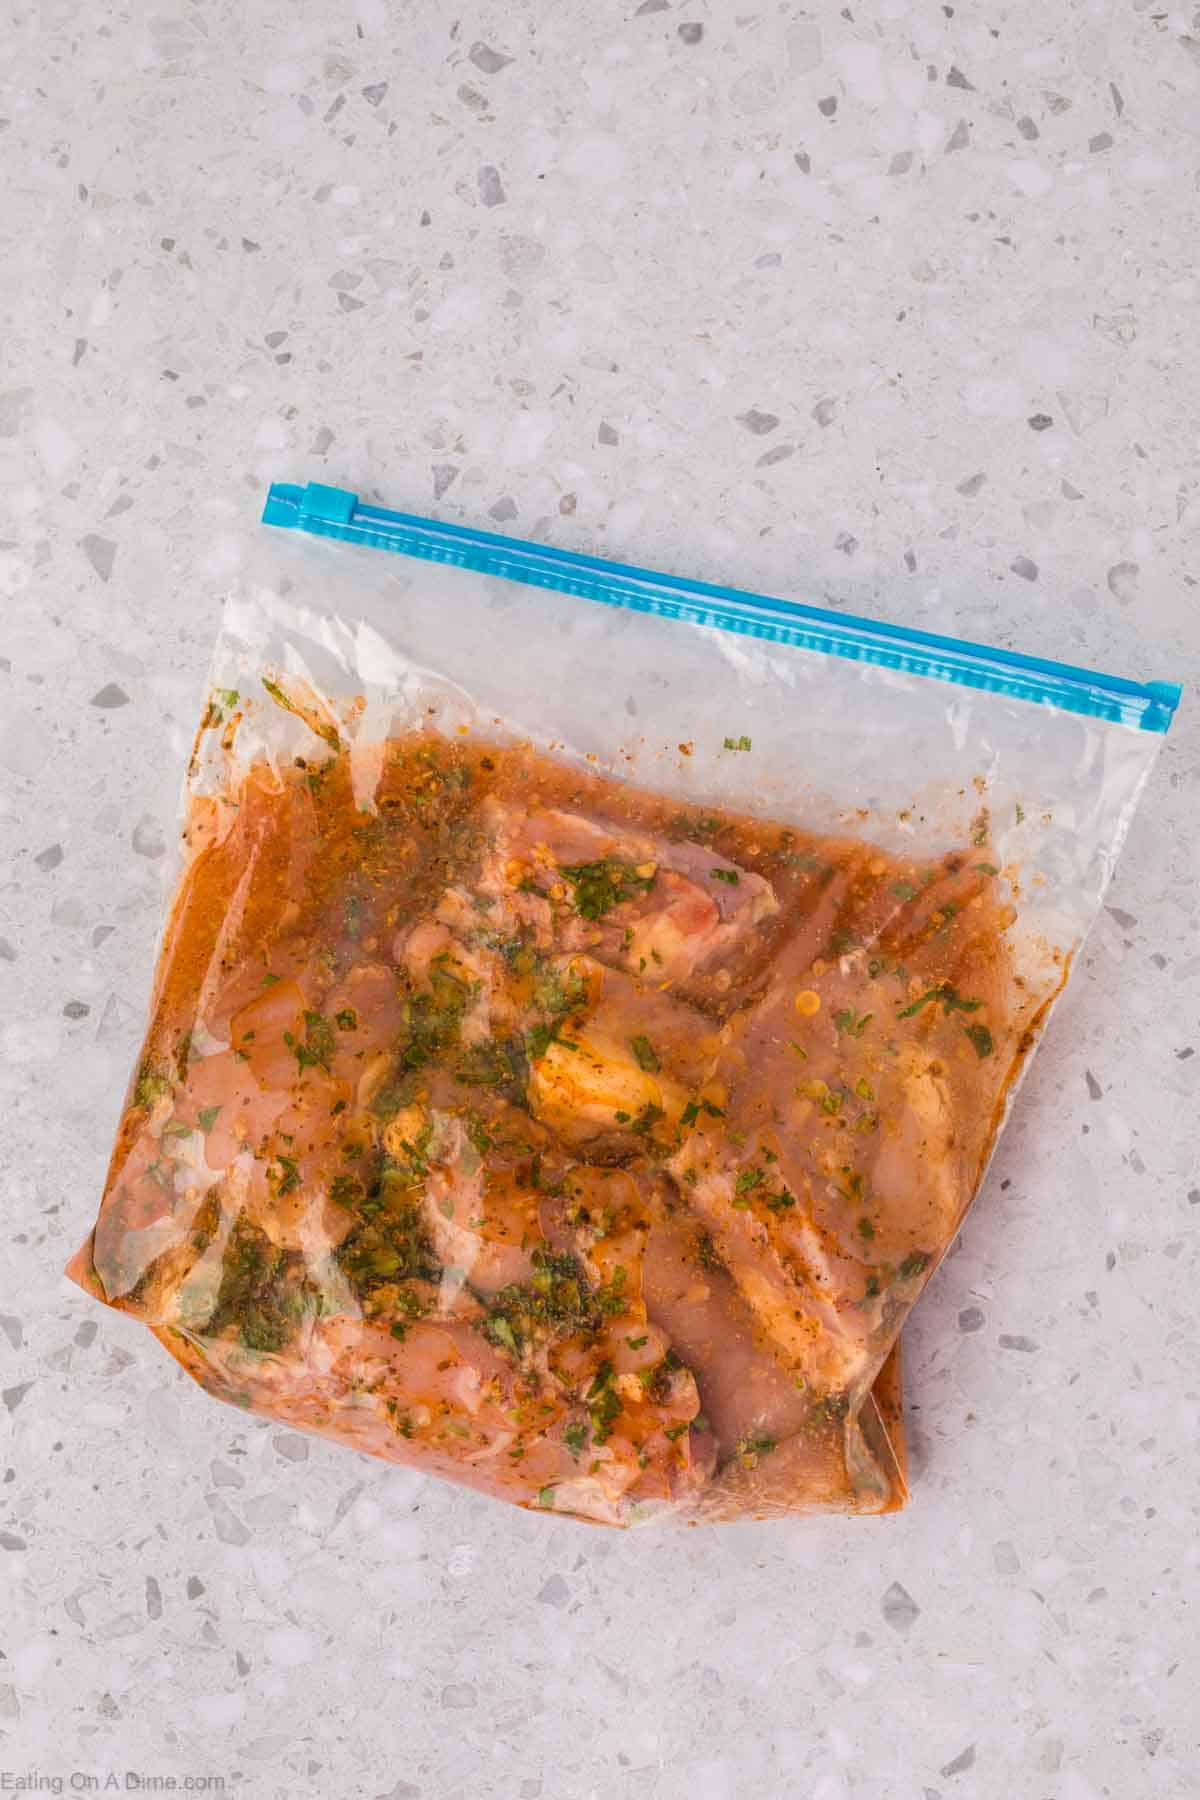 Marinating the chicken thighs in a zip lock bag